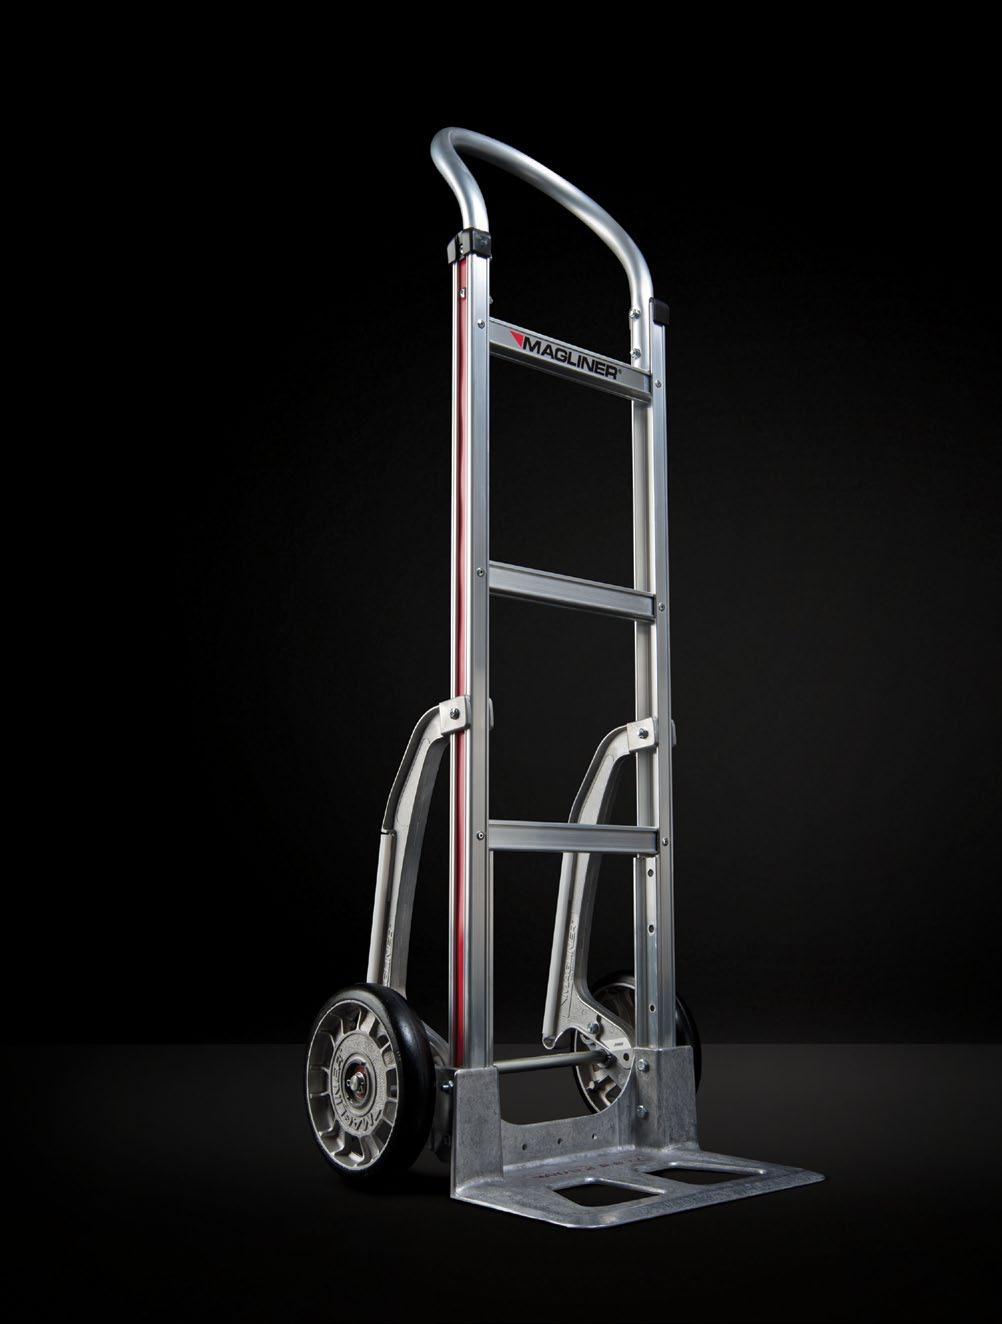 Two-Wheel Hand Trucks Lightweight, high strength aircraft grade aluminum. Engineered for optimum strength to weight ratio. Dual clinch aircraft style riveted construction.